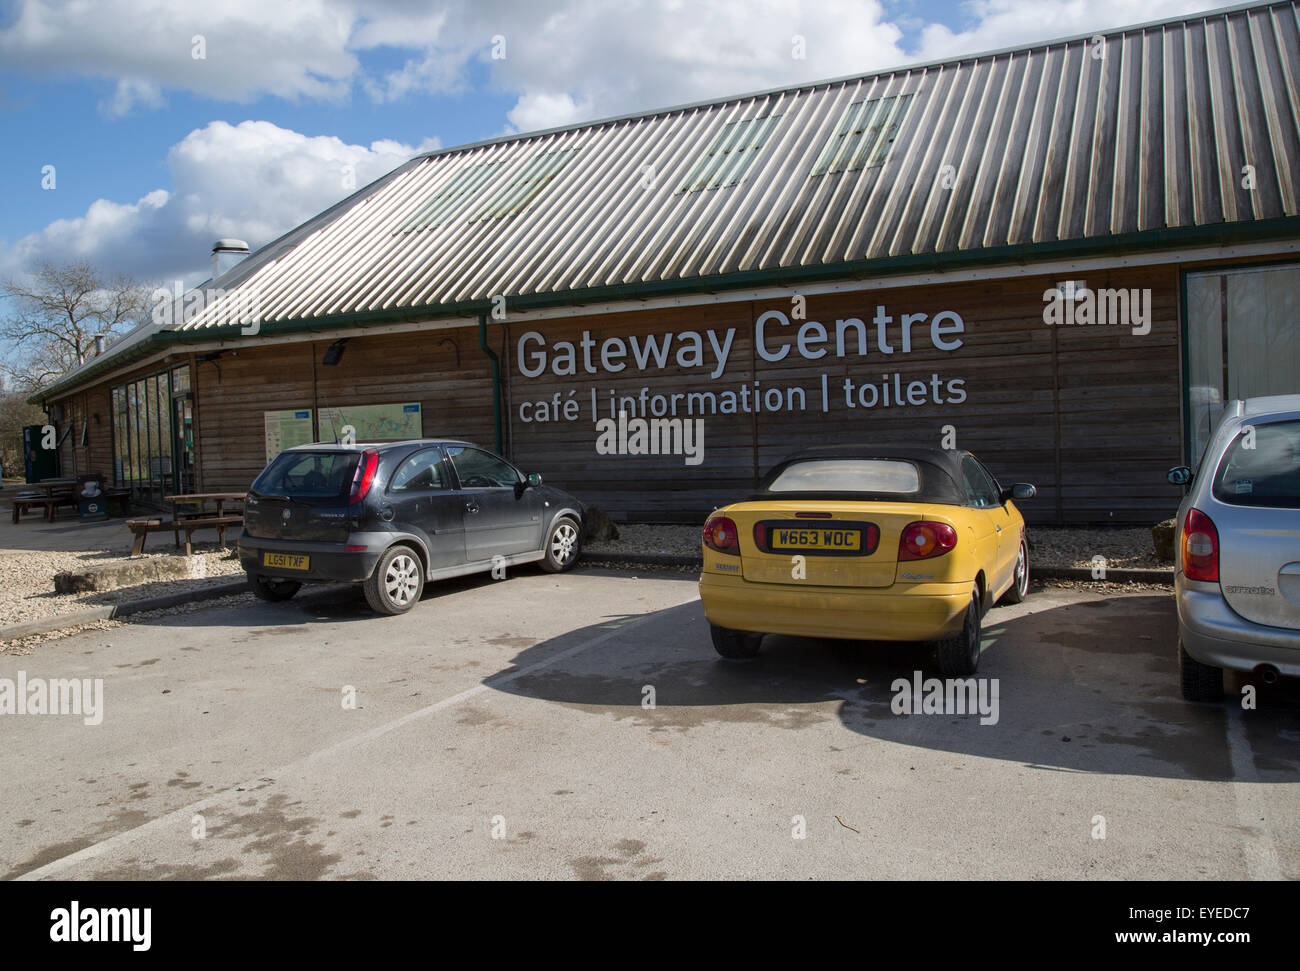 Gateway Centre, Cotswold water park, Cerney Wick, Cirencester, Gloucestershire, England, UK Stock Photo